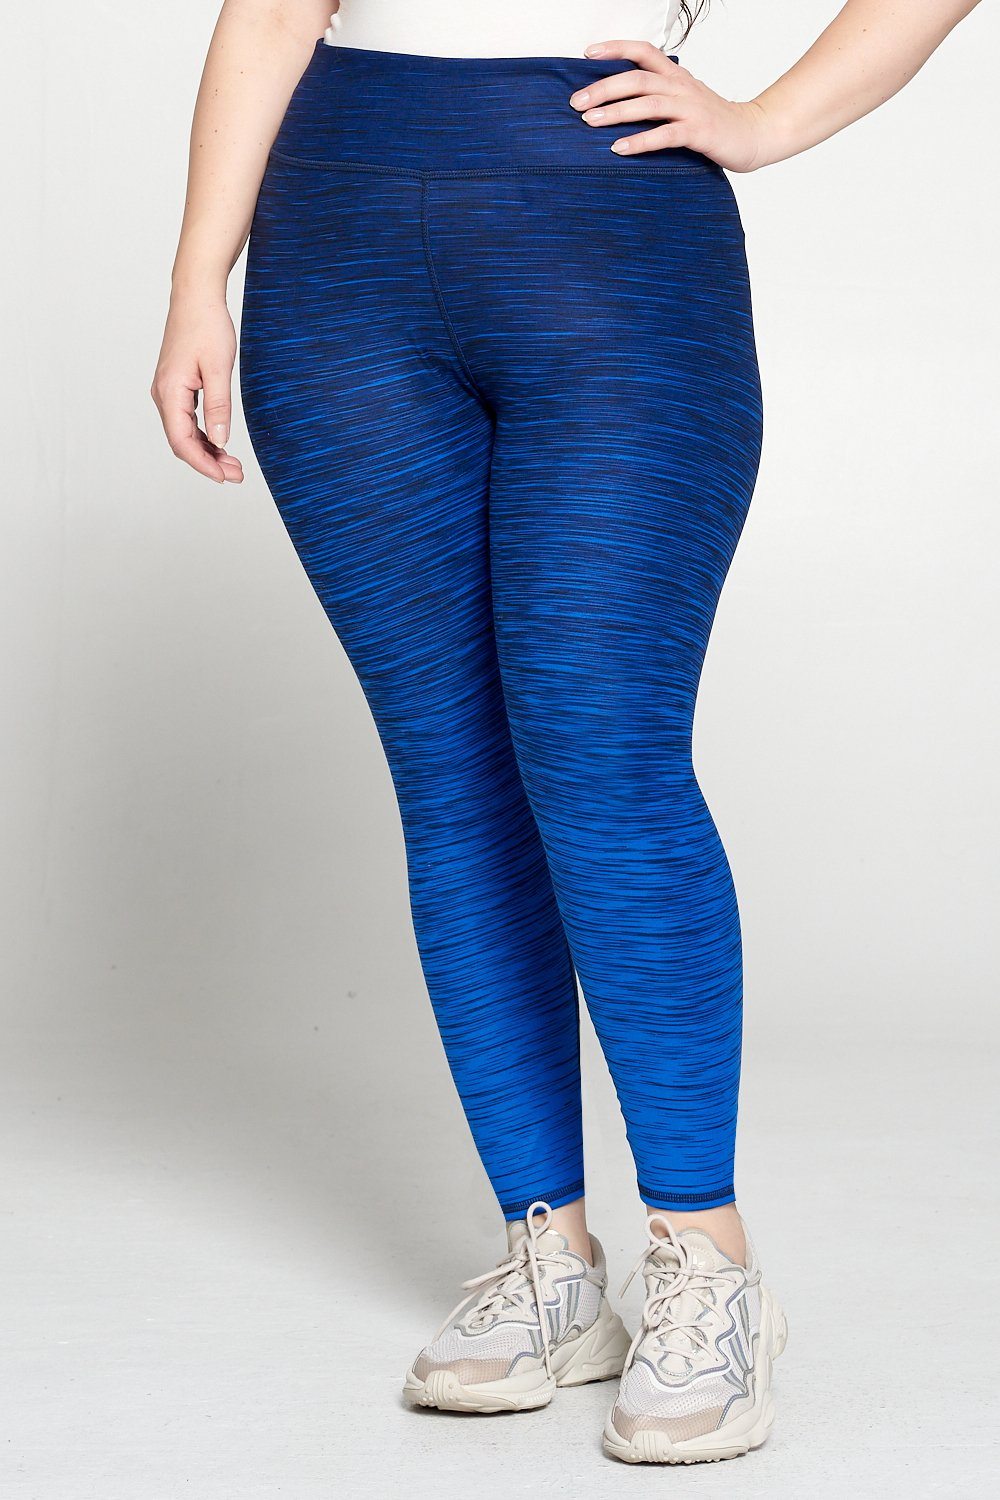 + Dark Royal Blue Ombre 7/8 Legging - Plus Size by EVCR